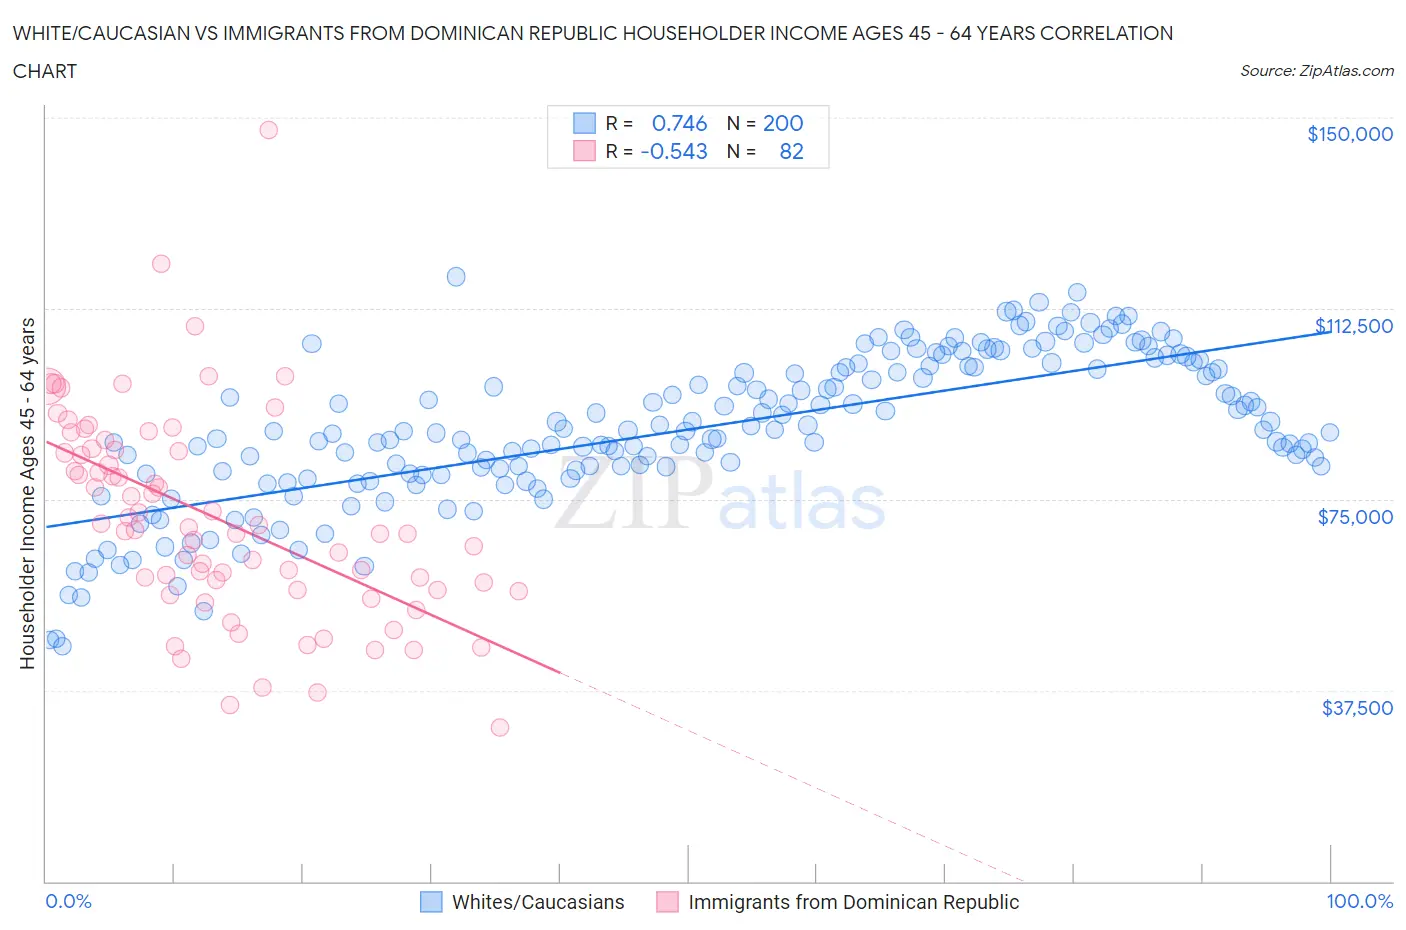 White/Caucasian vs Immigrants from Dominican Republic Householder Income Ages 45 - 64 years